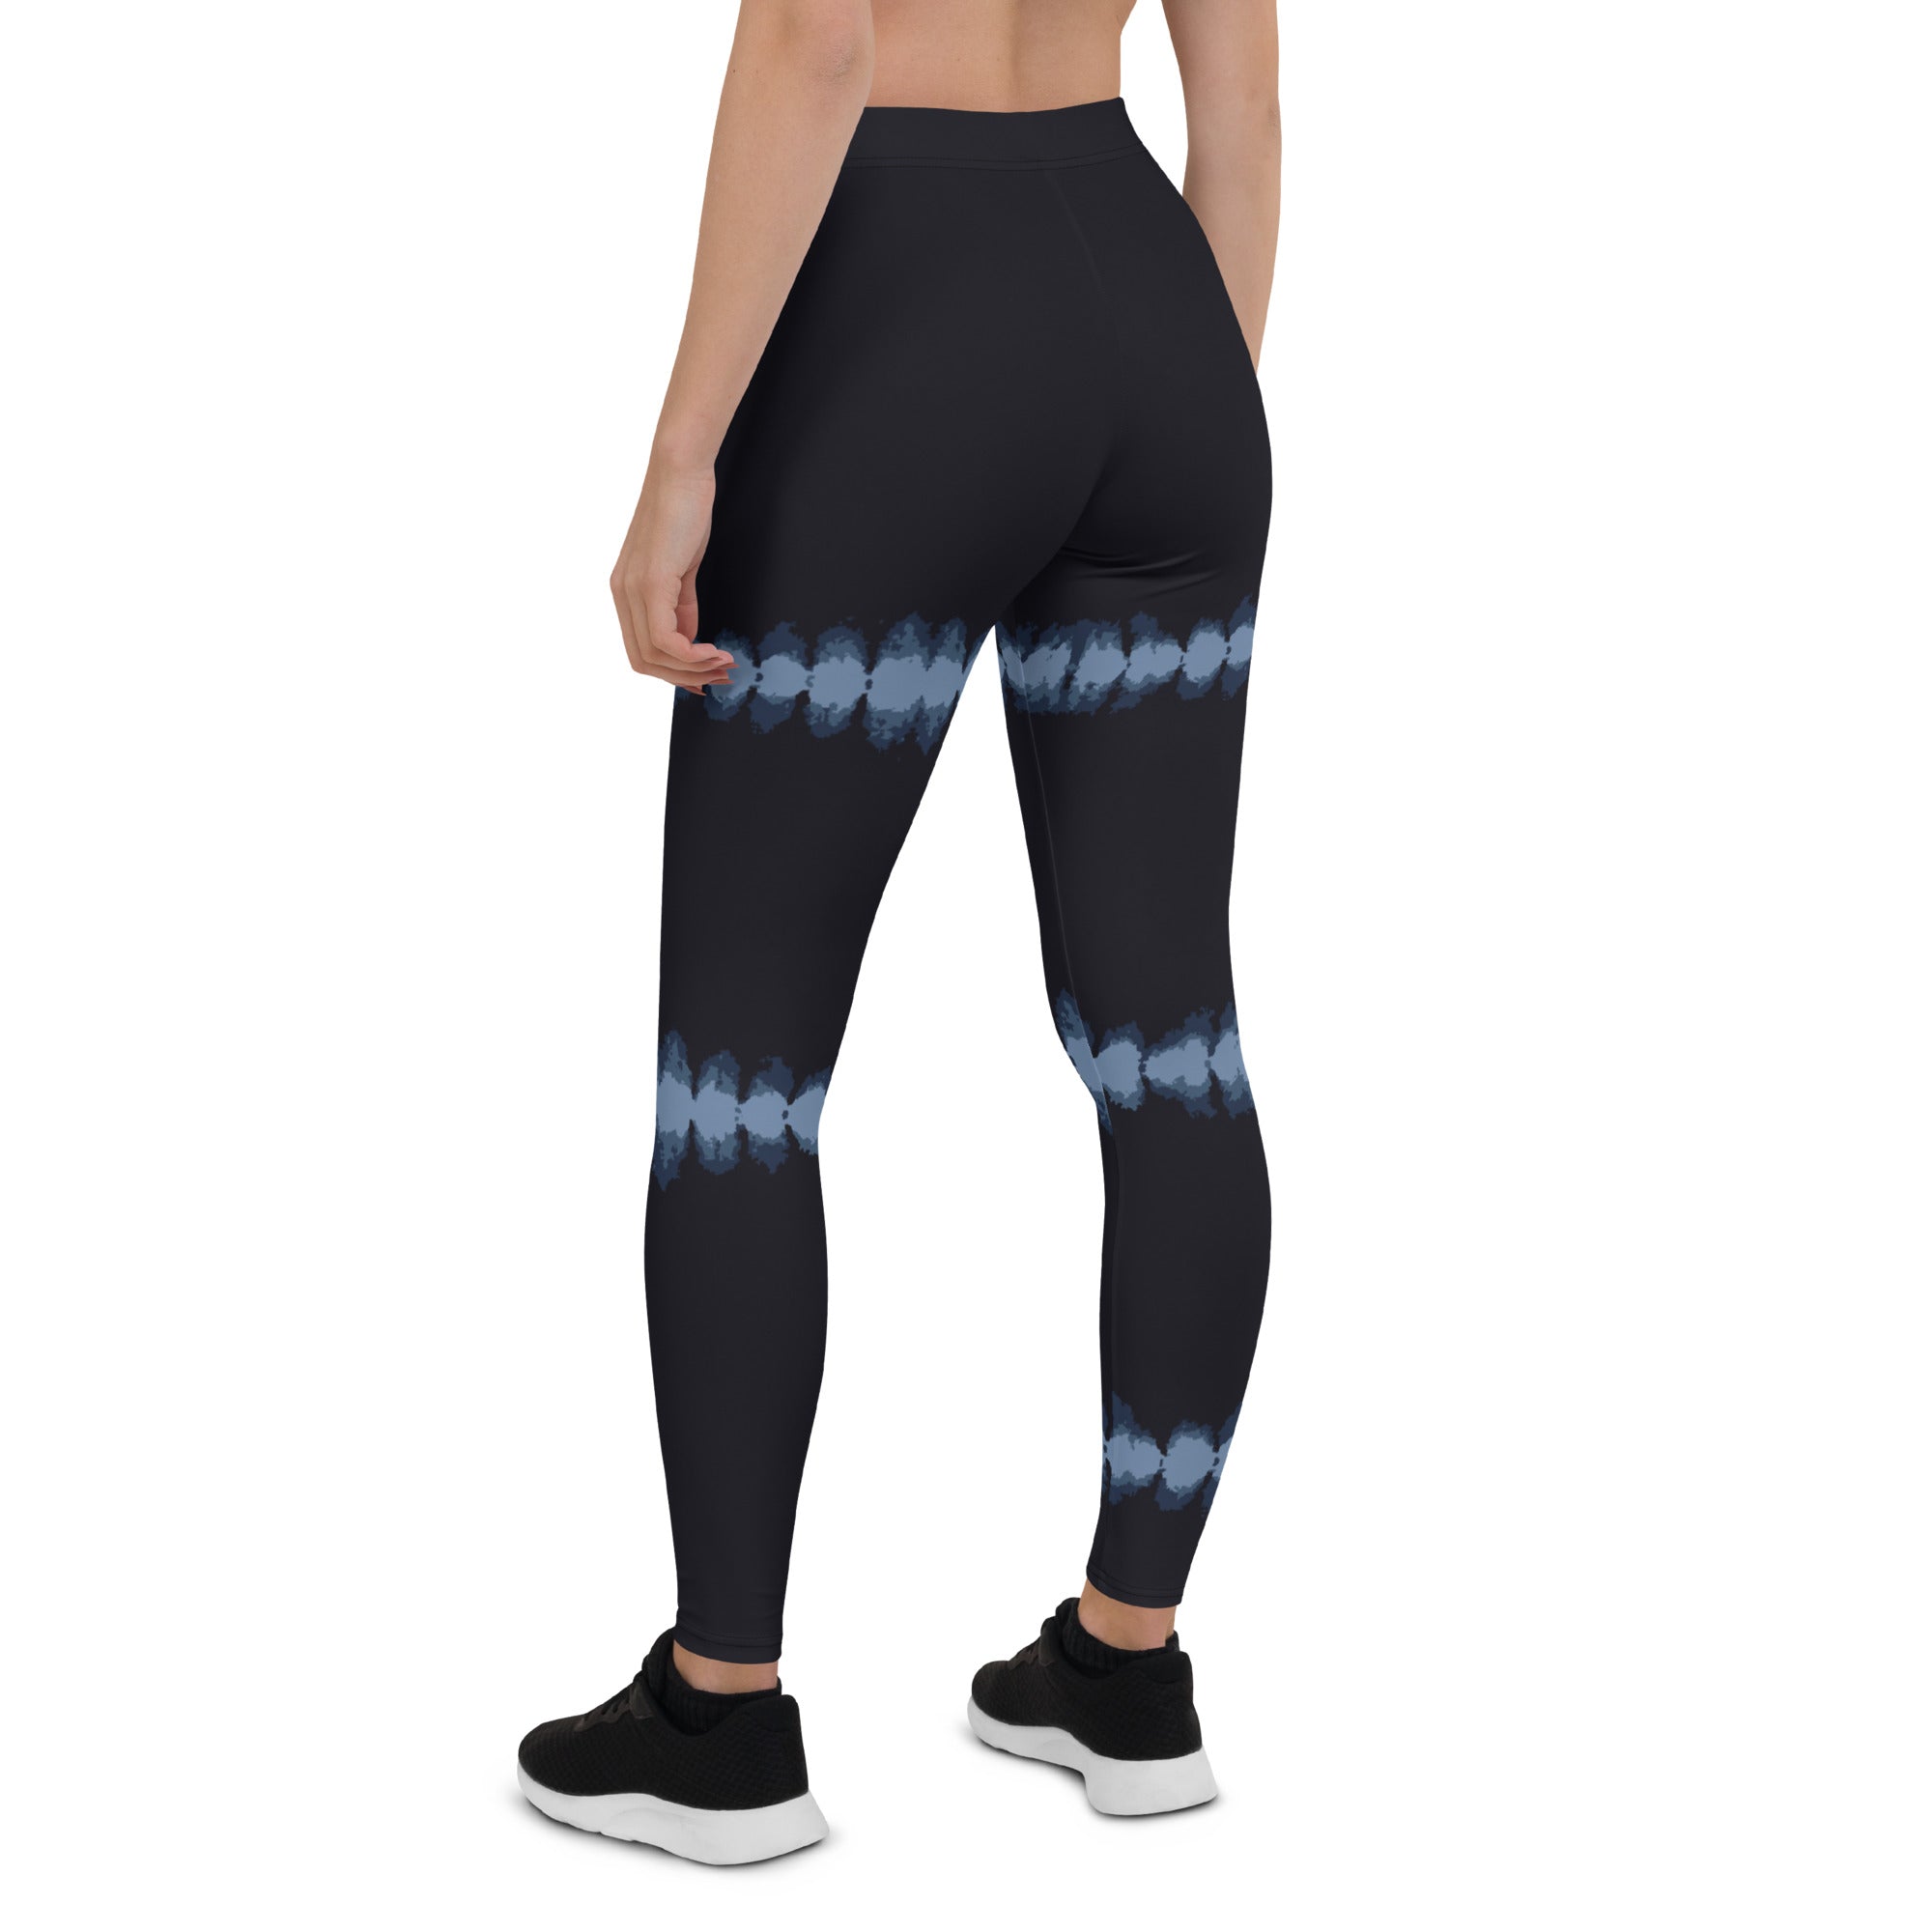 How to choose the right yoga leggings? – Relax